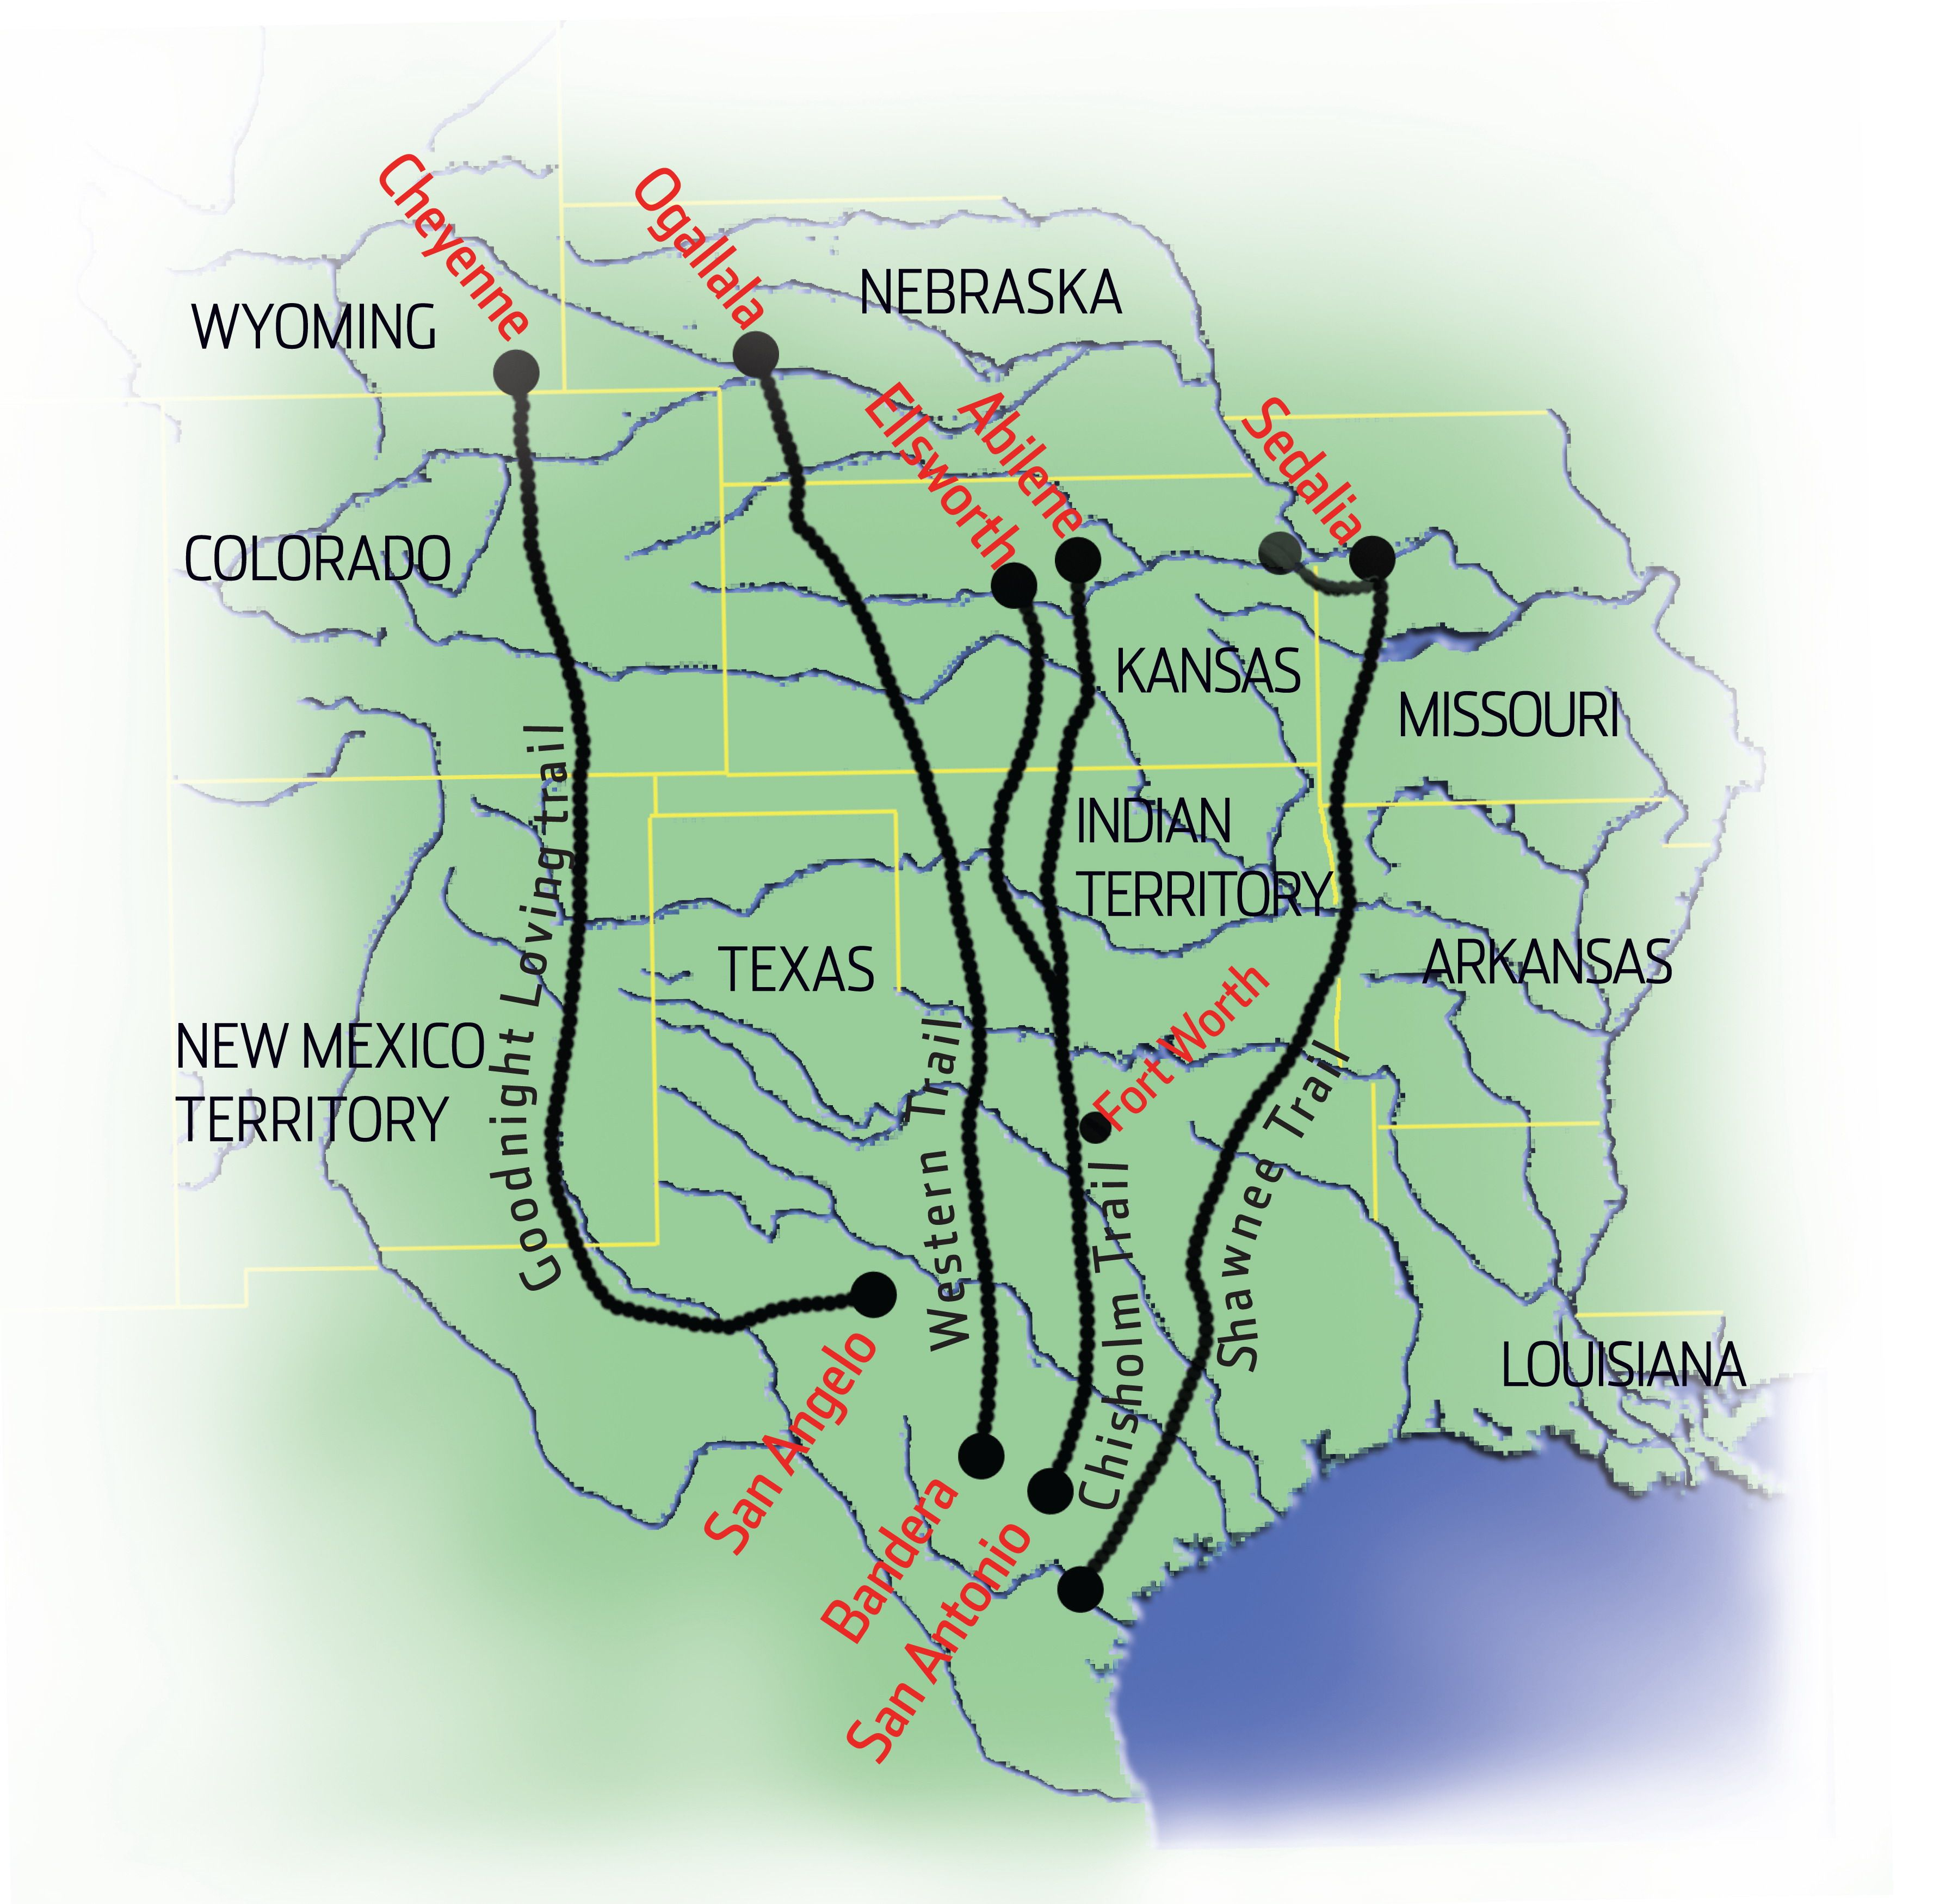 Cattle Drives Map | Cattle Drives | Cattle Drive, Teaching History - Texas Cattle Trails Map